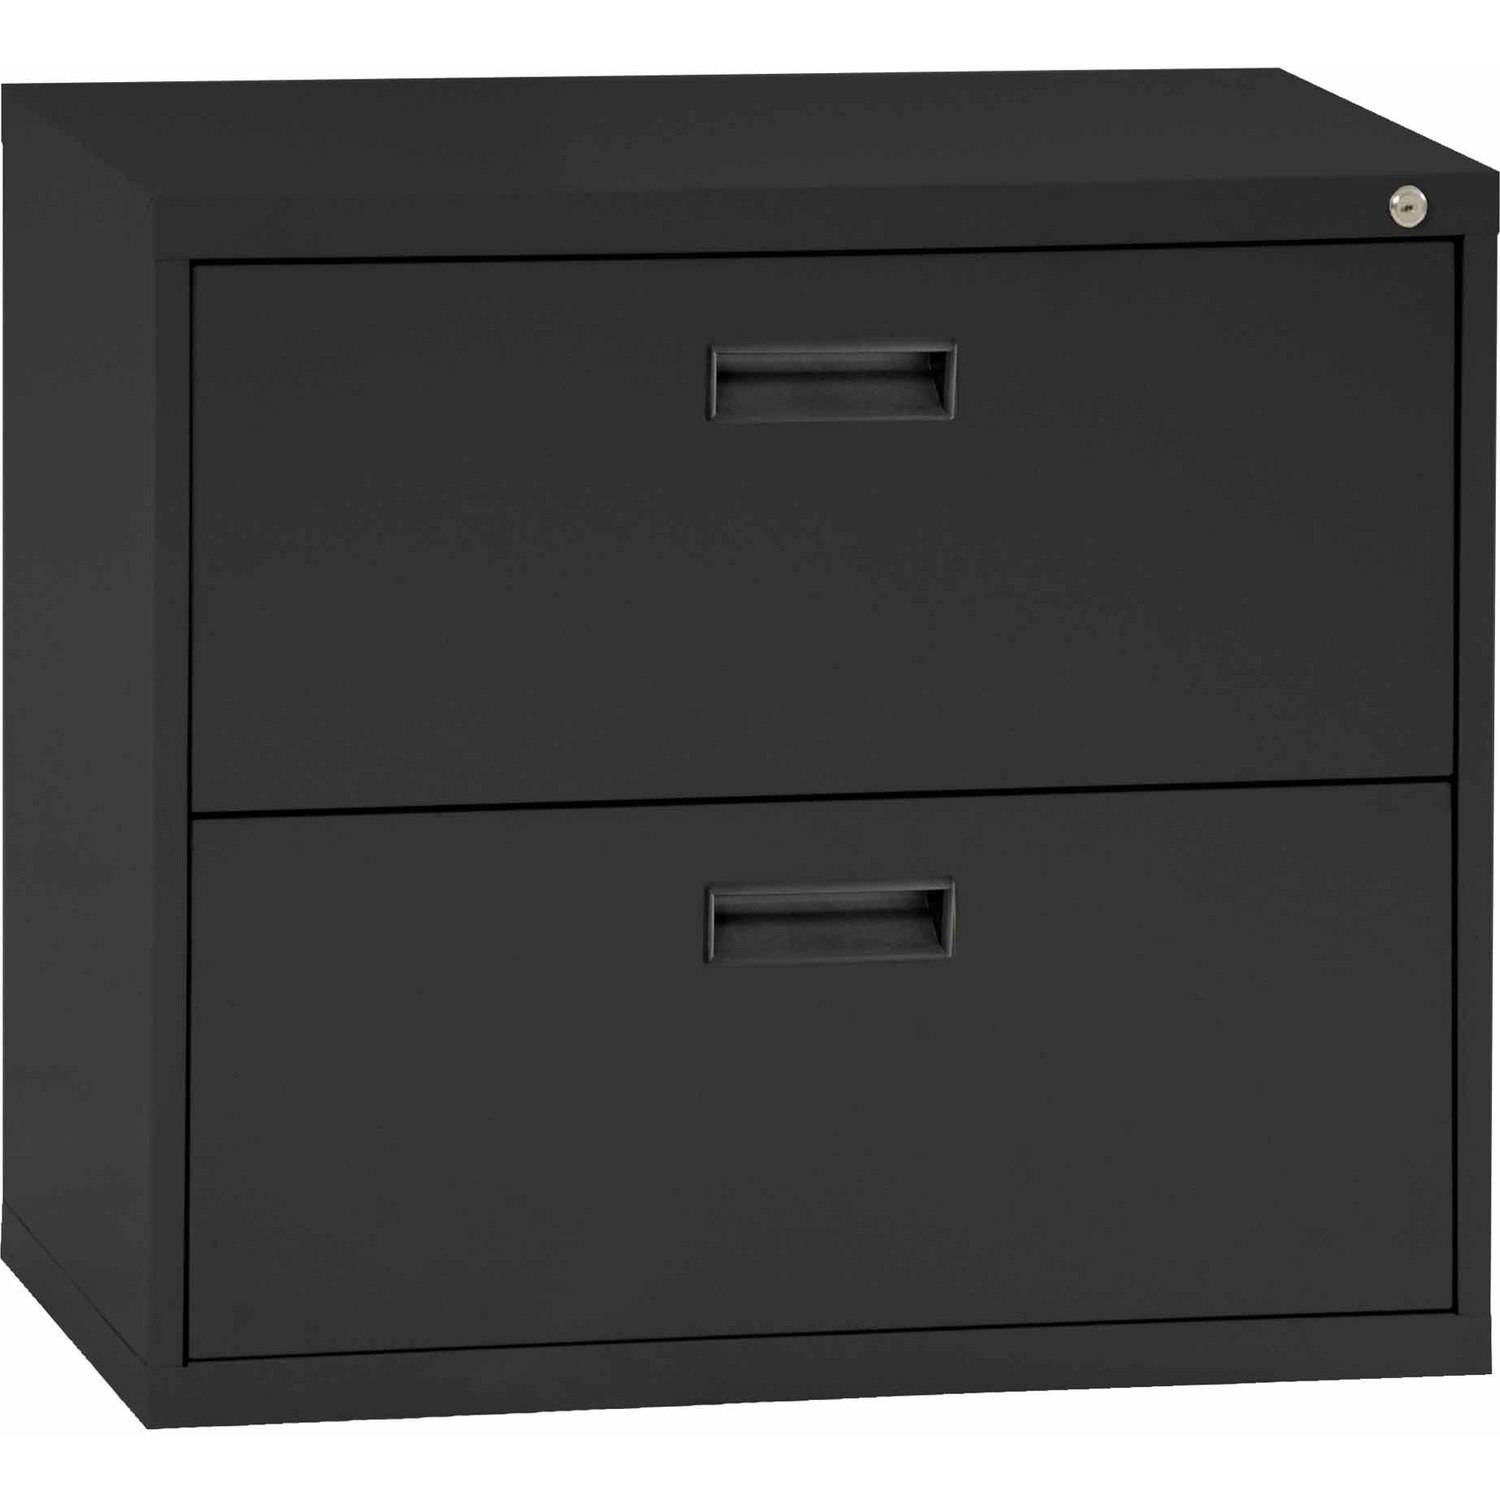 Sandusky Steel Lateral File Cabinet With Plastic Handle 2 Drawers E202l 09 pertaining to sizing 1500 X 1500